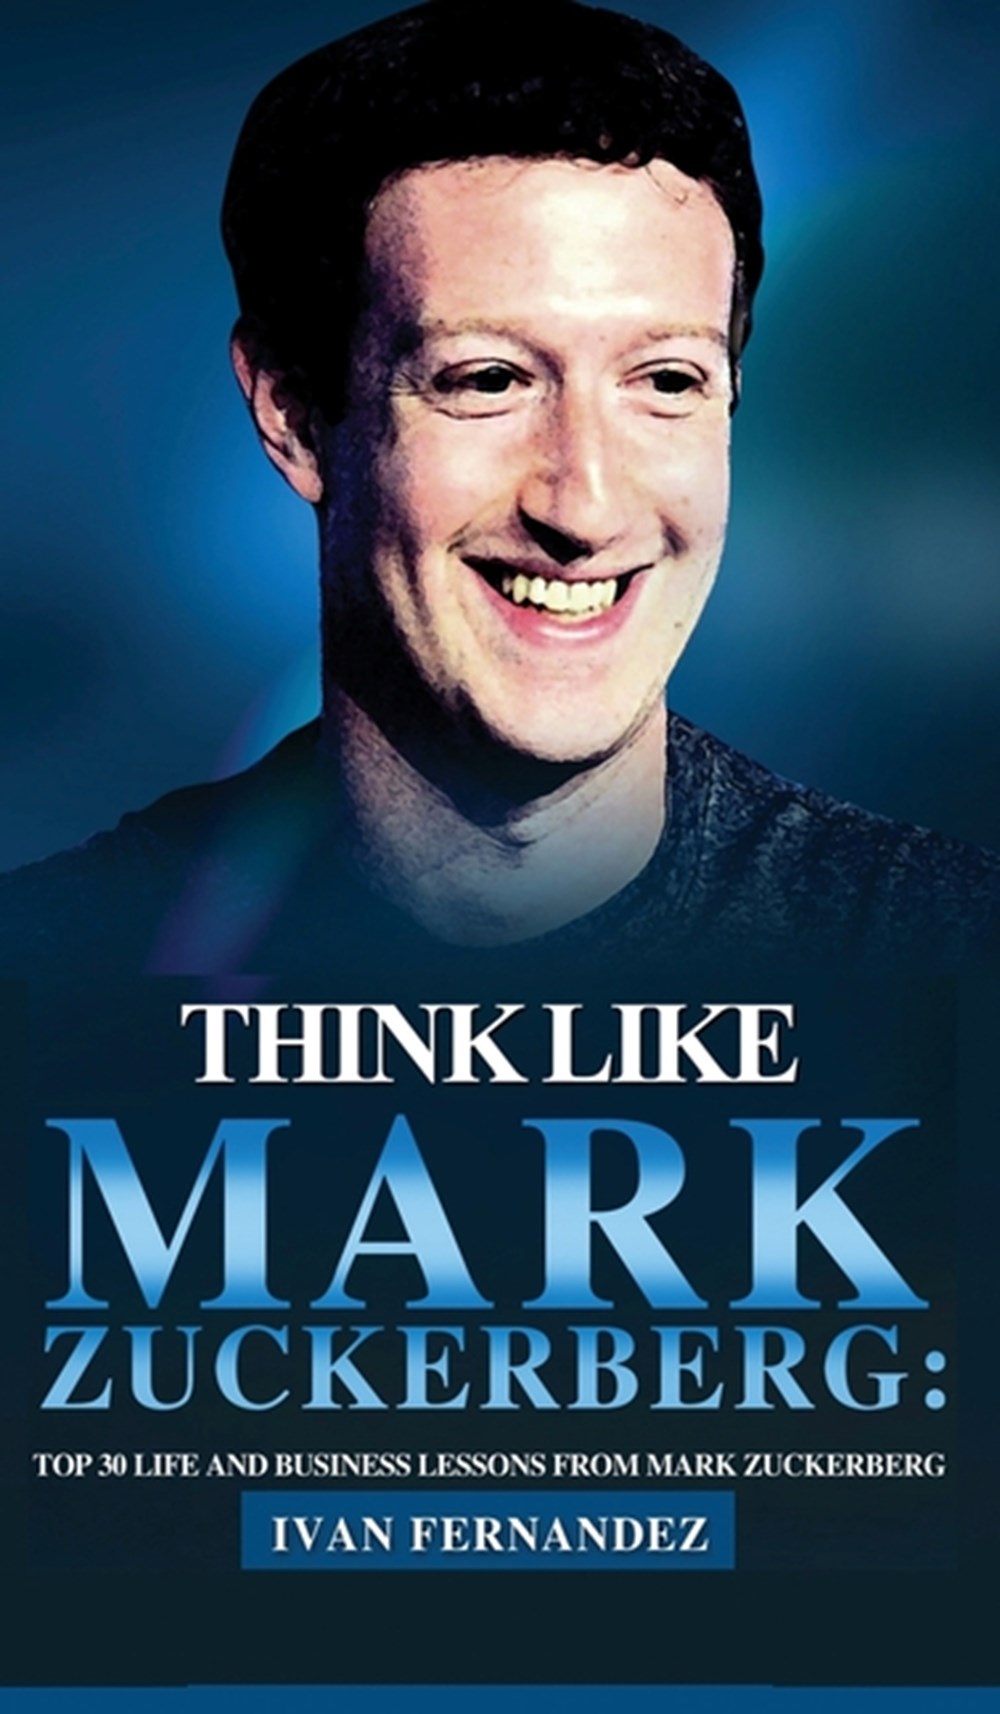 Think Like Mark Zuckerberg Top 30 Life and Business Lessons from Mark Zuckerberg